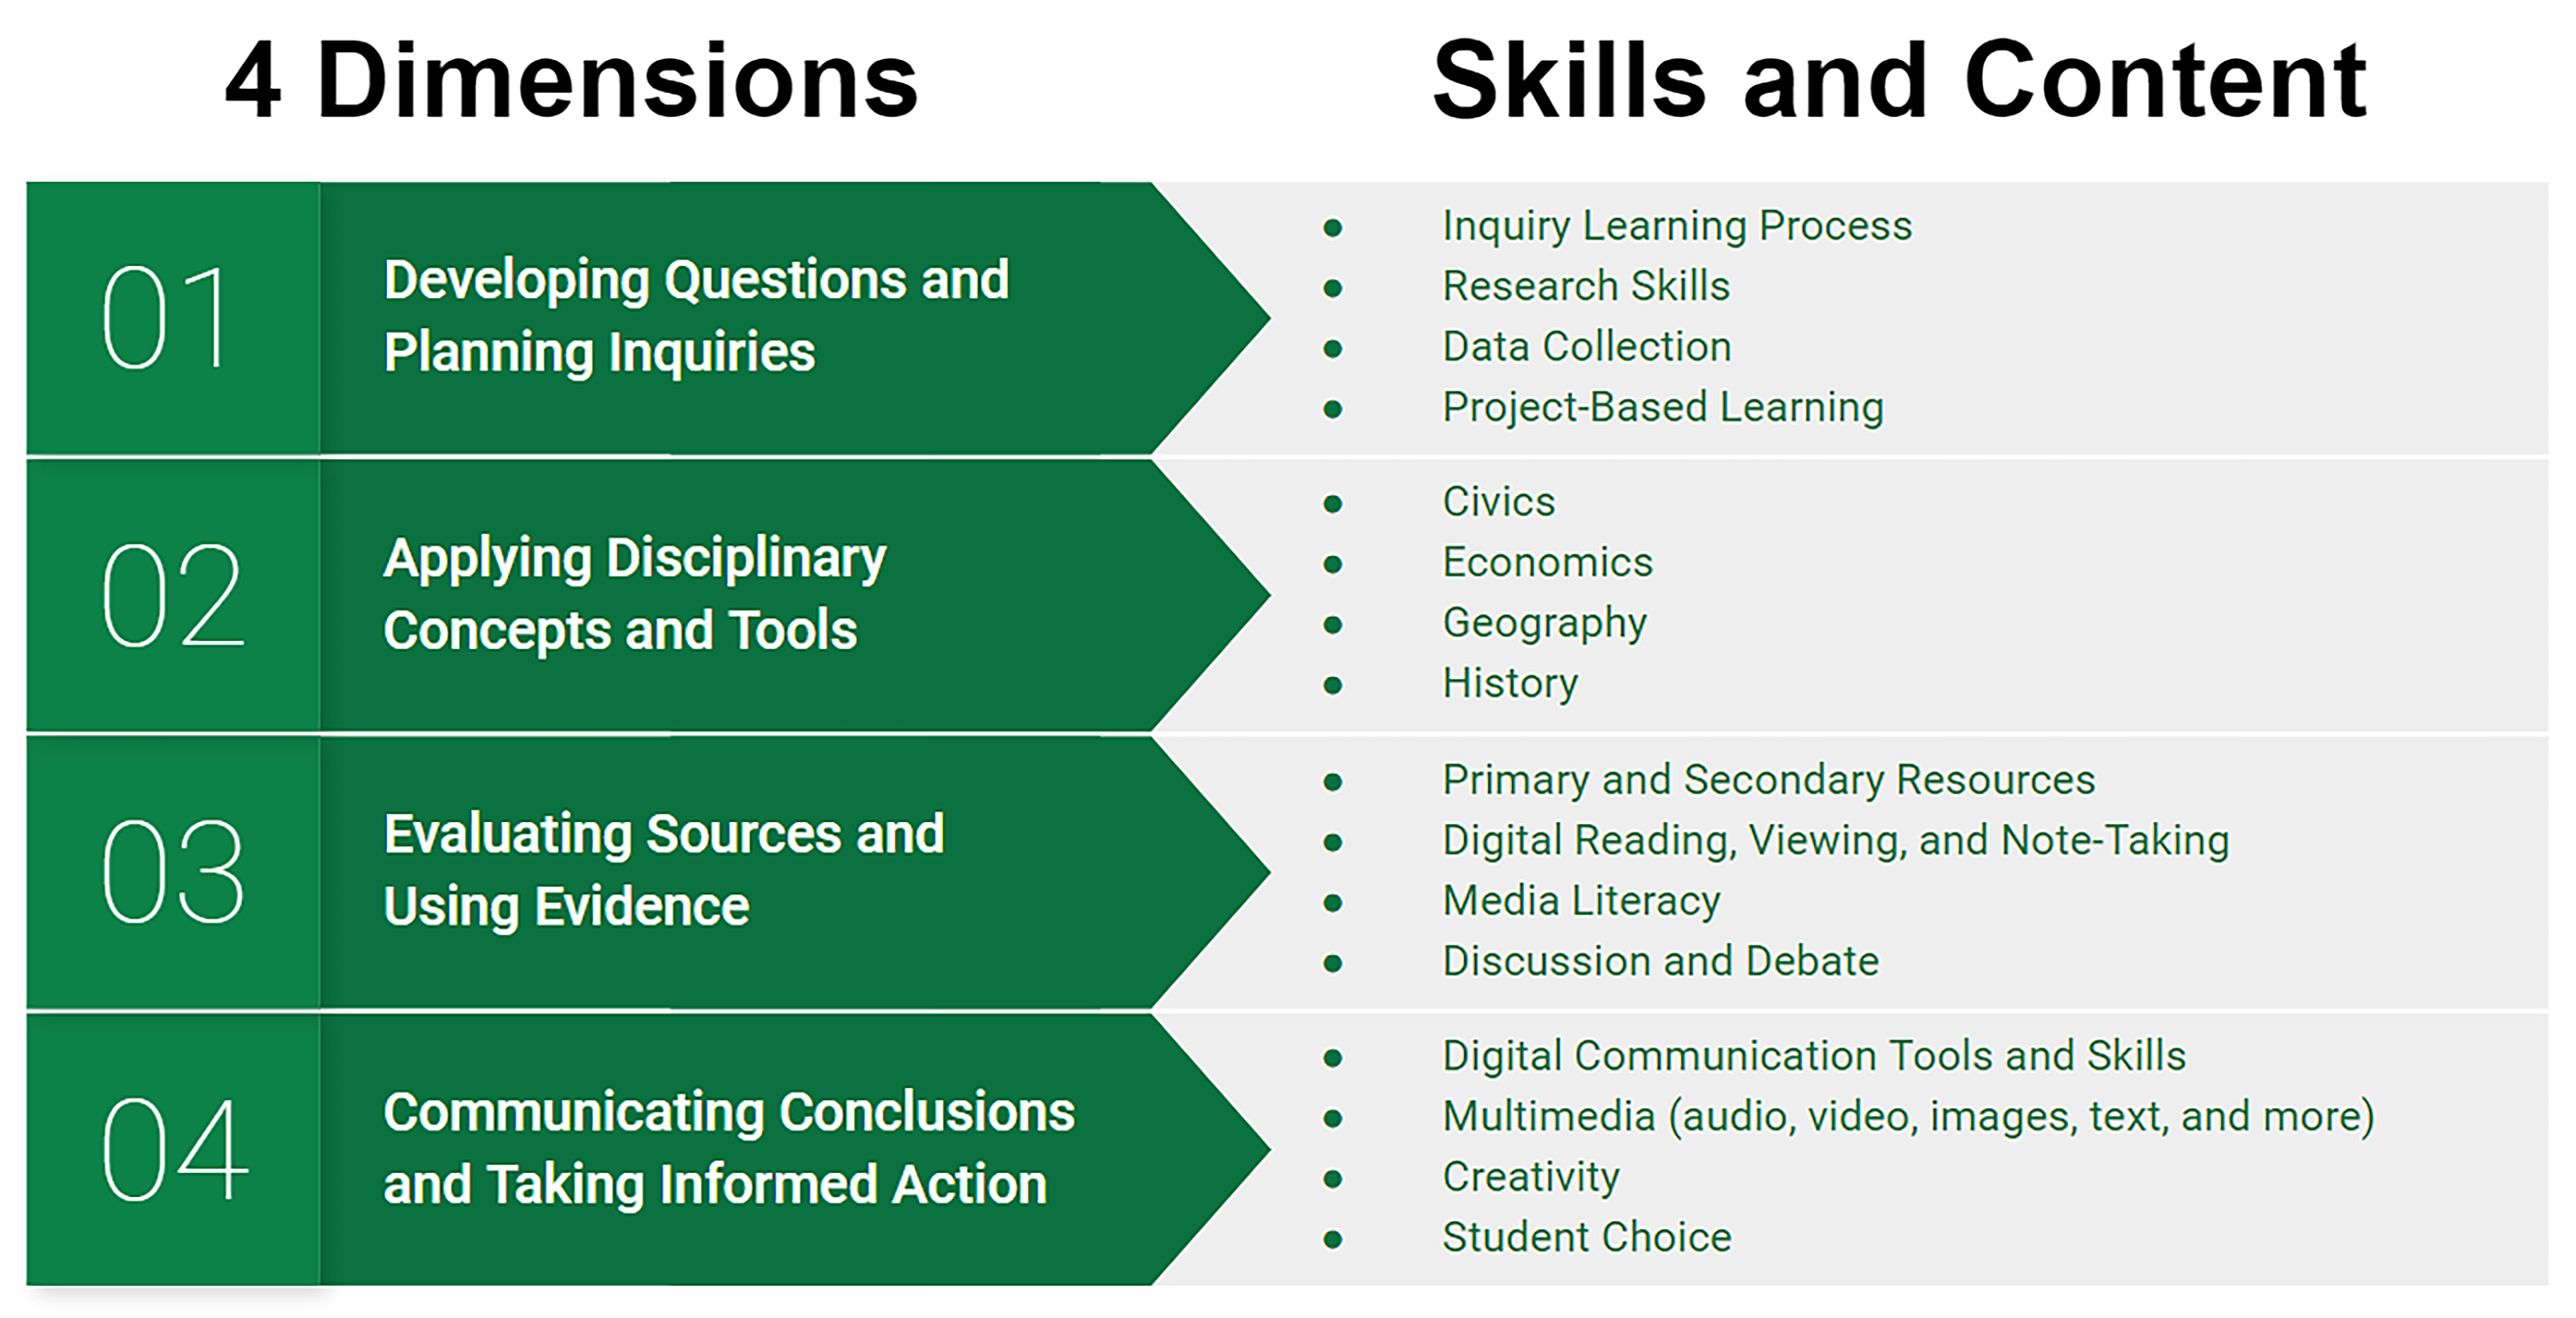 This image describes the 4 Dimensions as well as related skills and content. 1. Developing questions and planning inquiries: inquiry learning process, research skills, data collection, and project-based learning; 2. Applying disciplinary concepts and tools: civics, economics, geography, and history; 3. Evaluating sources and using evidence: primary and secondary resources, digital reading, viewing, and note-taking, media literacy, discussion and debate; 4. Communicating conclusions and taking informed action: digital communication tools and skills, multimedia, creativity, and student choice.